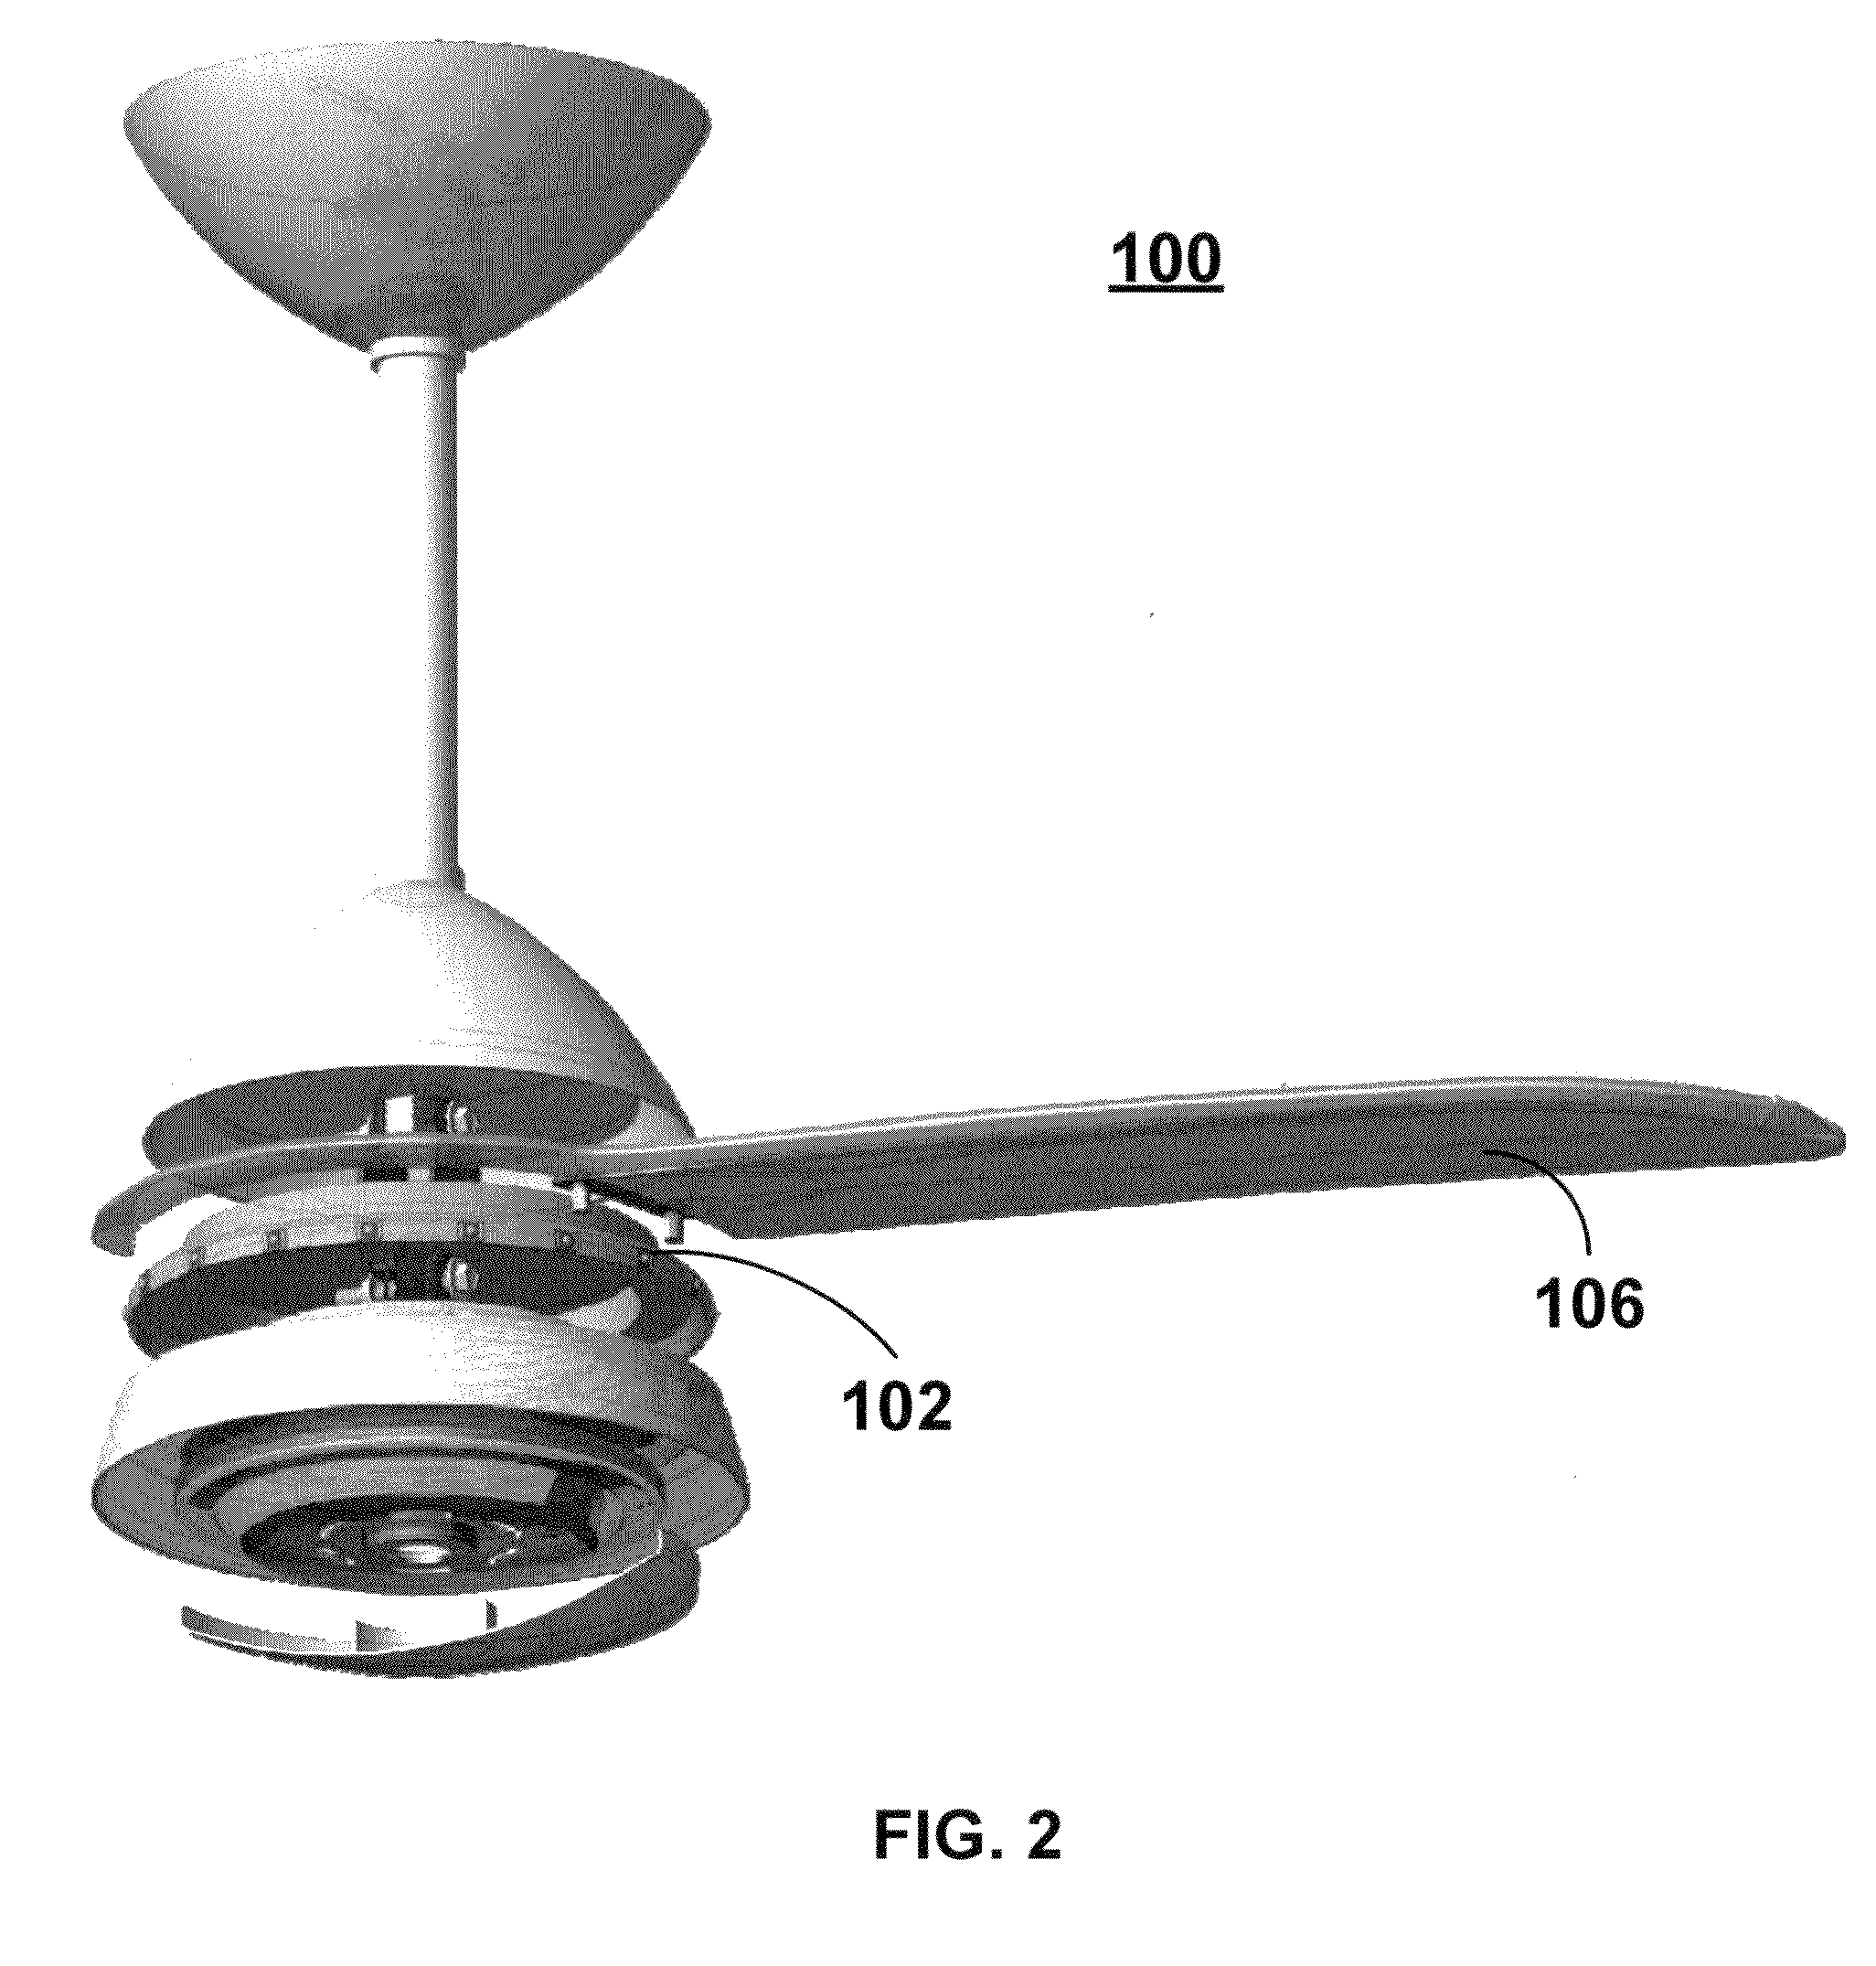 Apparatus configured to provide functional and aesthetic lighting from a fan